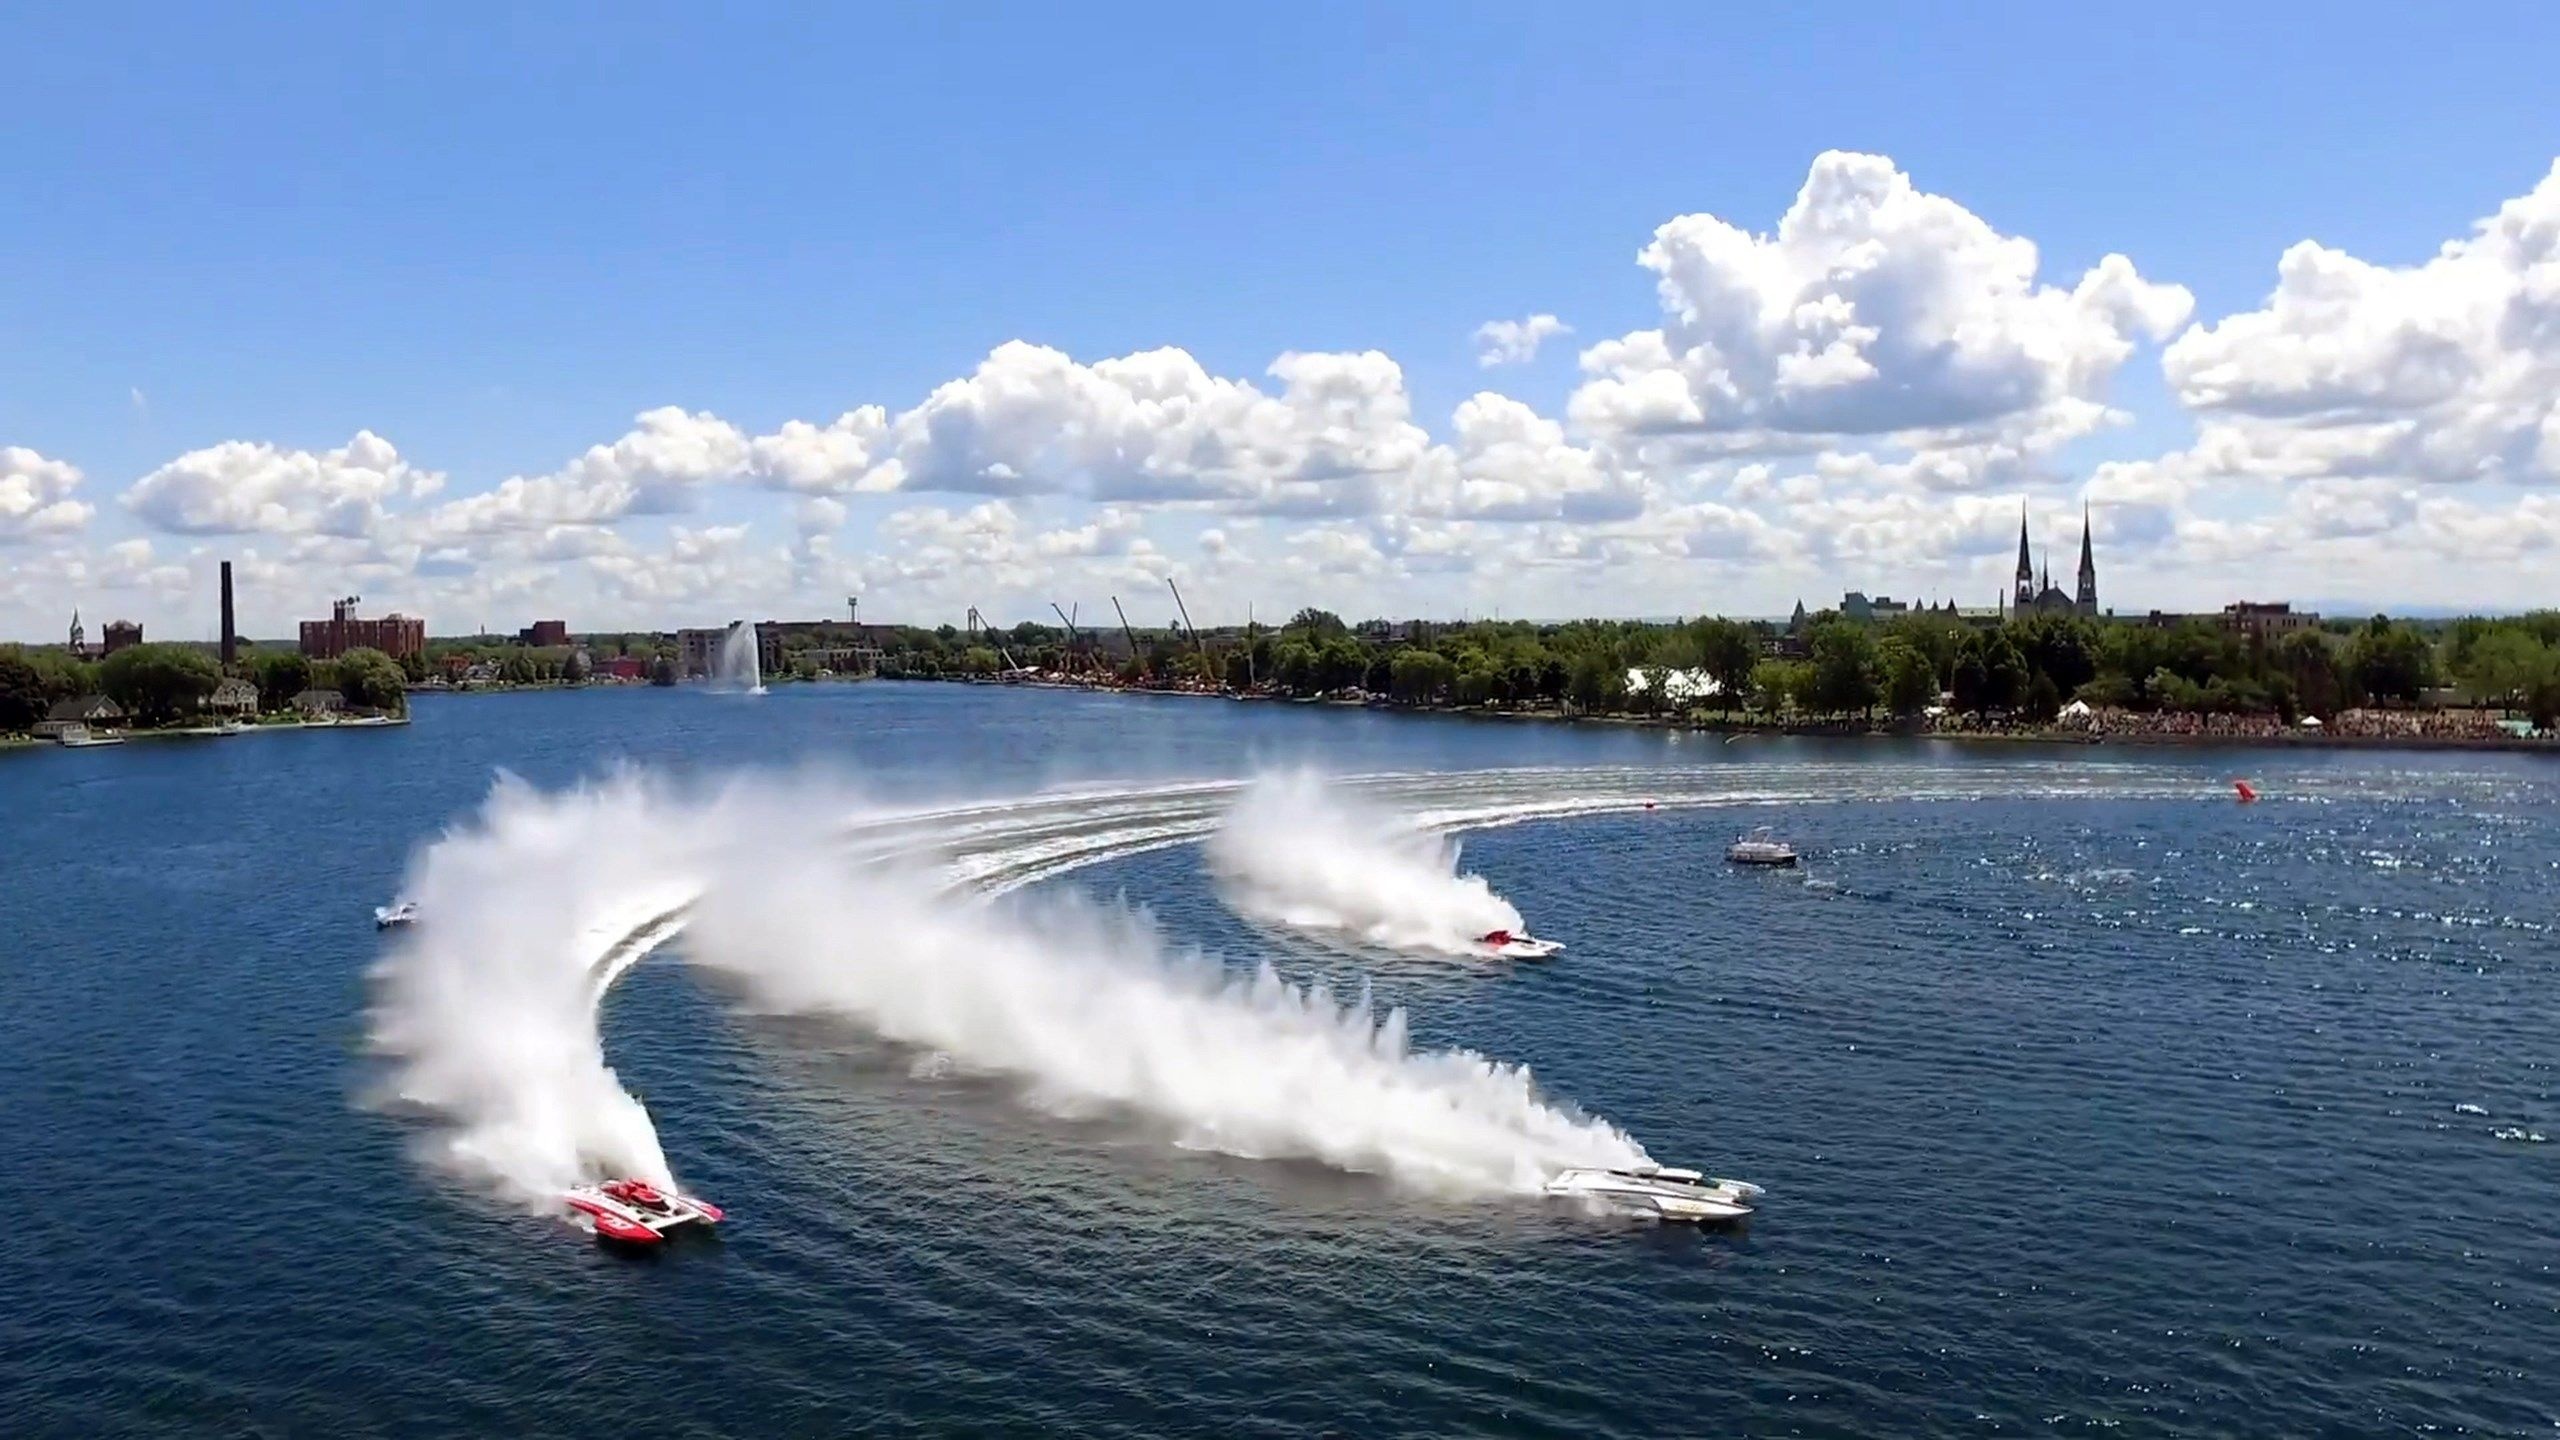 Hydroplane: A sport involving racing motorboats on lakes and rivers. 2560x1440 HD Wallpaper.